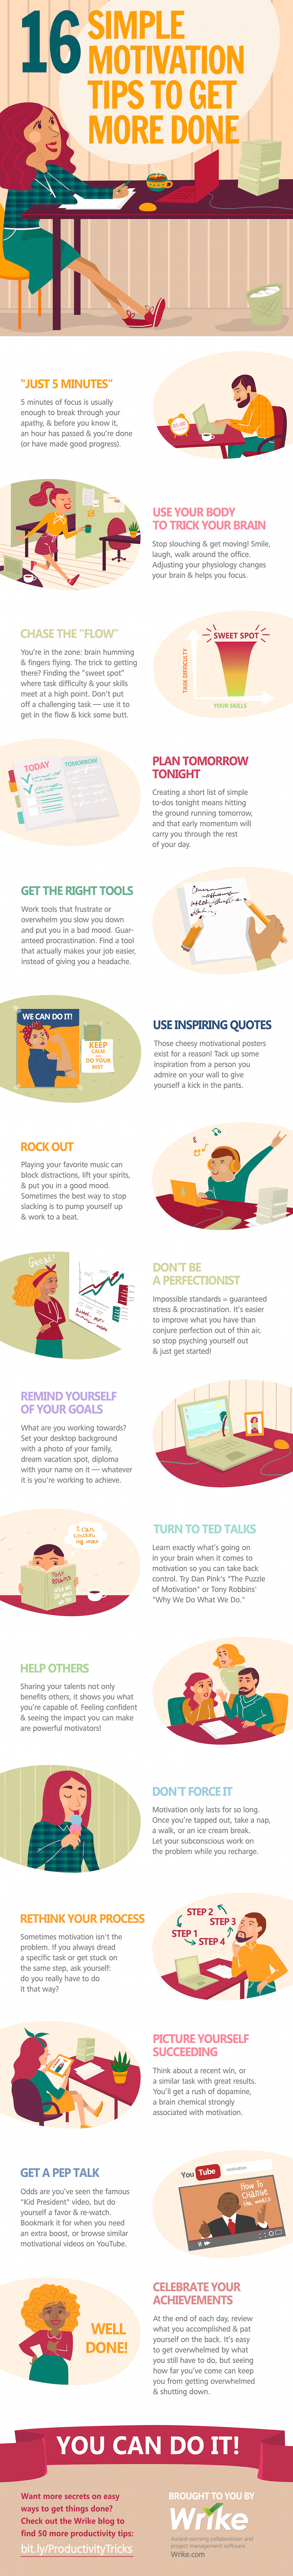 16 Simple Motivation Tips to Get More Done (#Infographic)